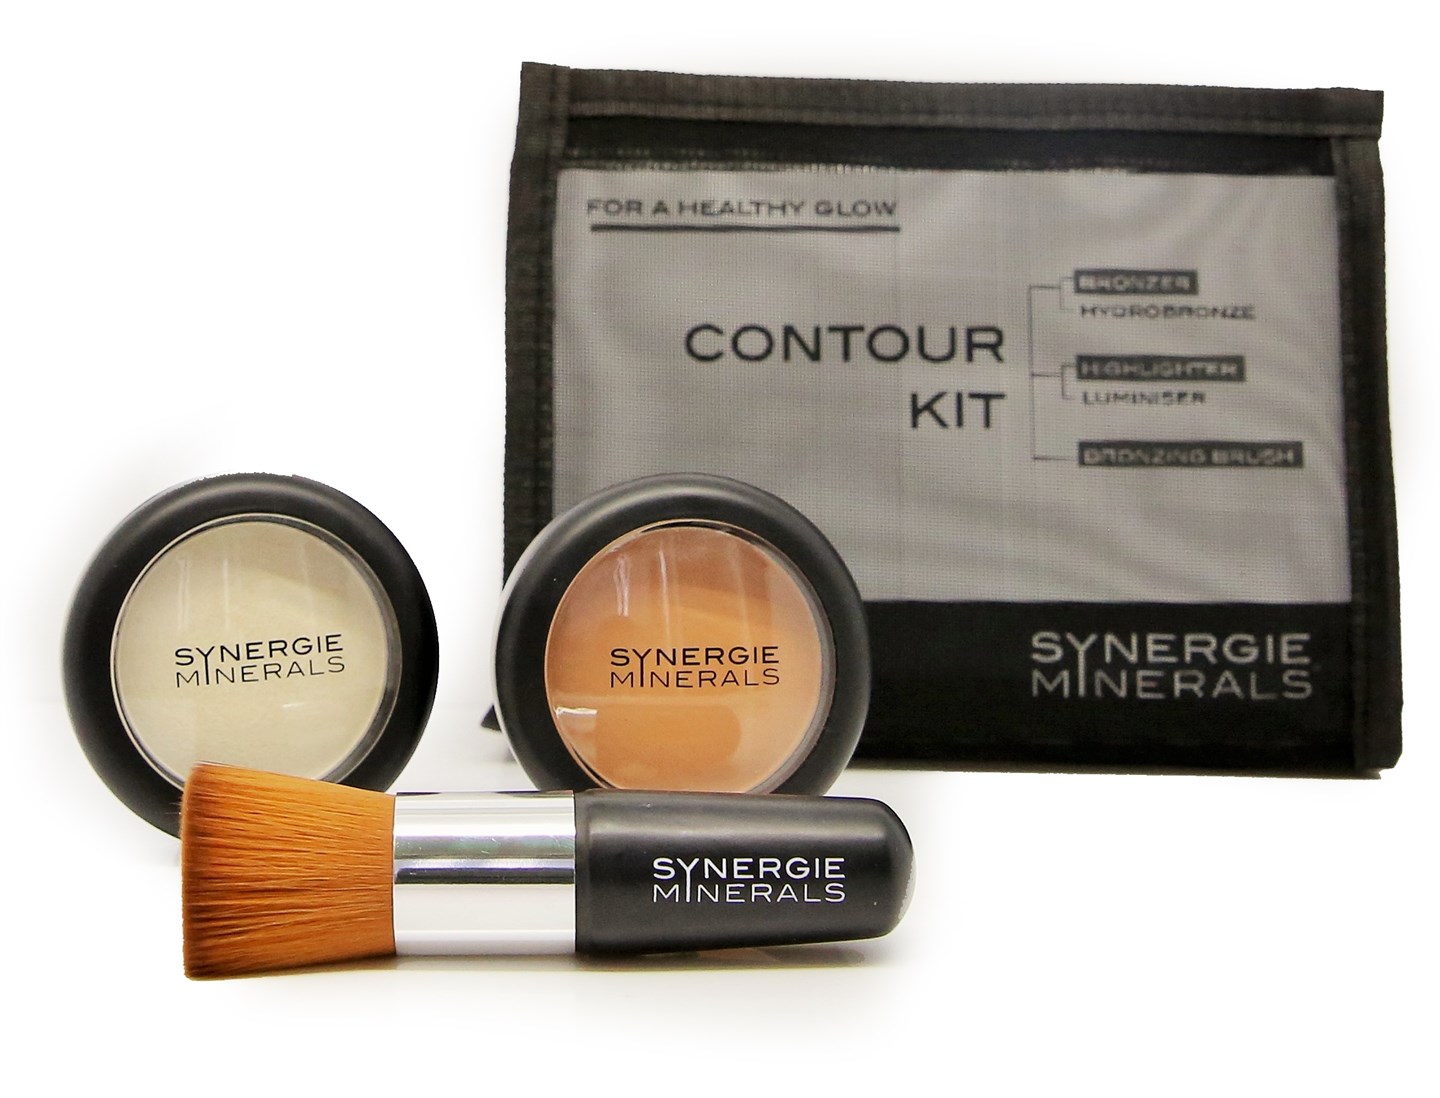 Synergie Minerals Contour Kit